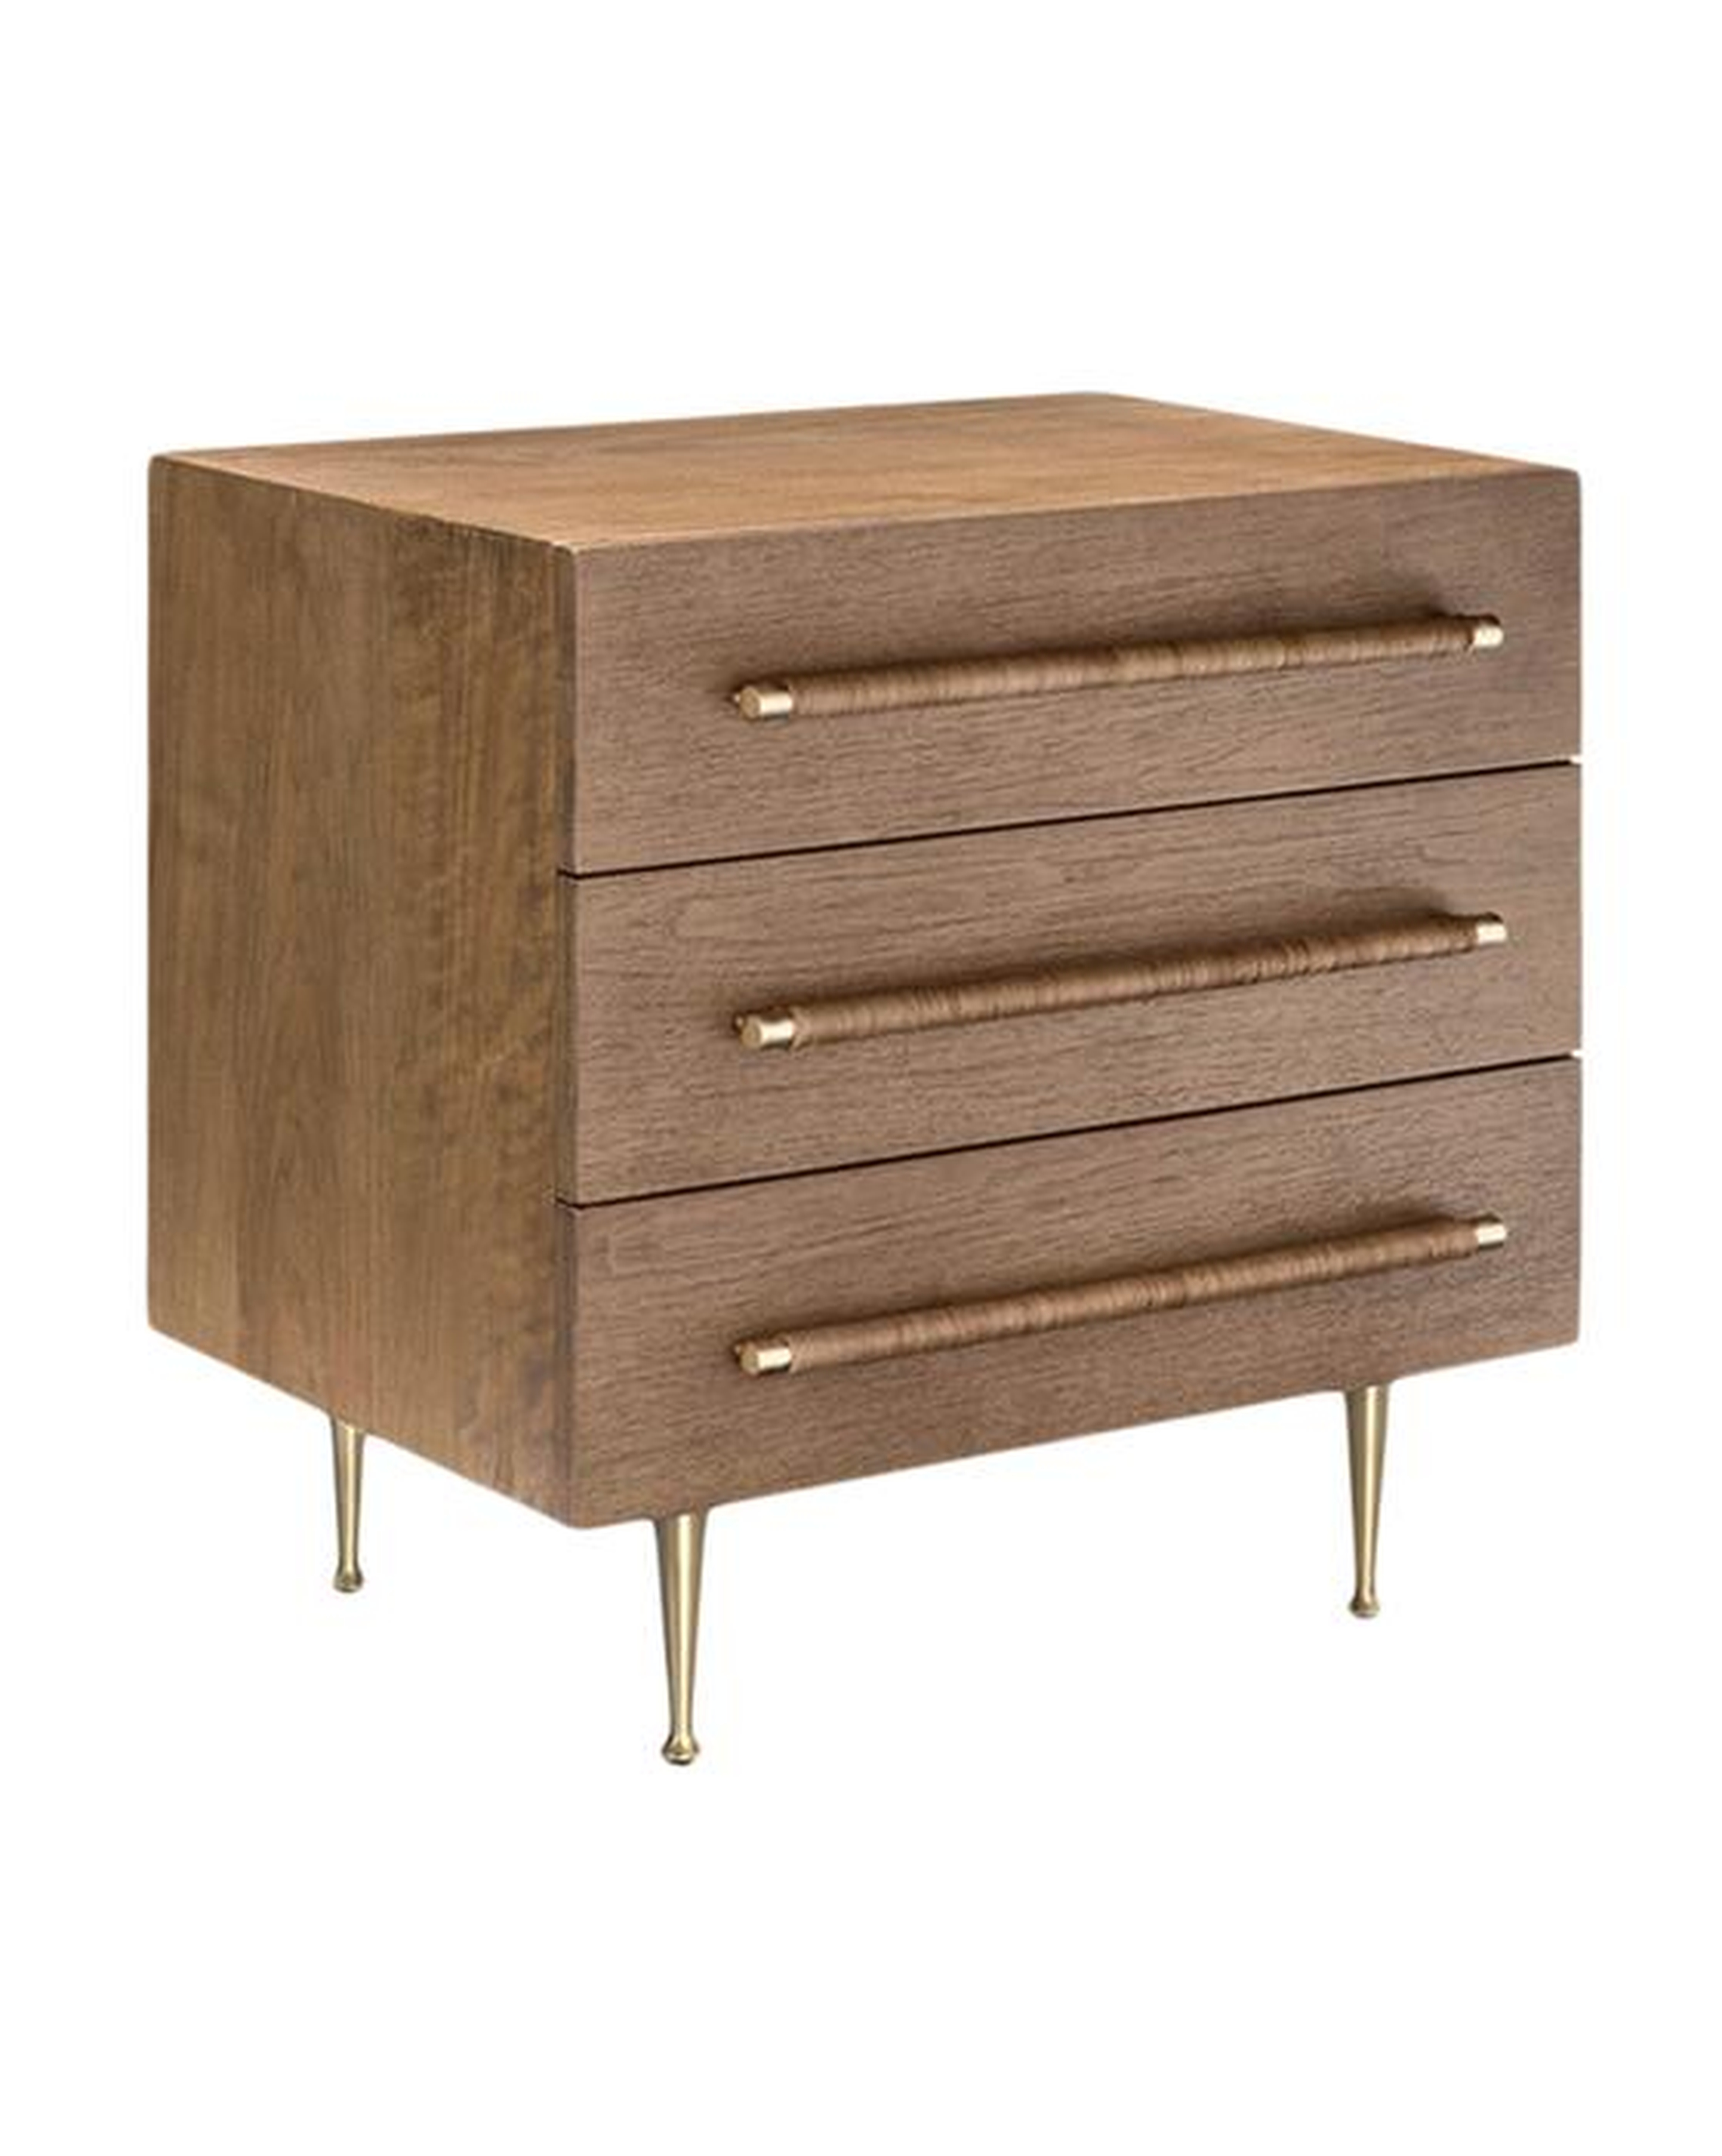 WESTLYN NIGHTSTAND, TOFFEE - McGee & Co.